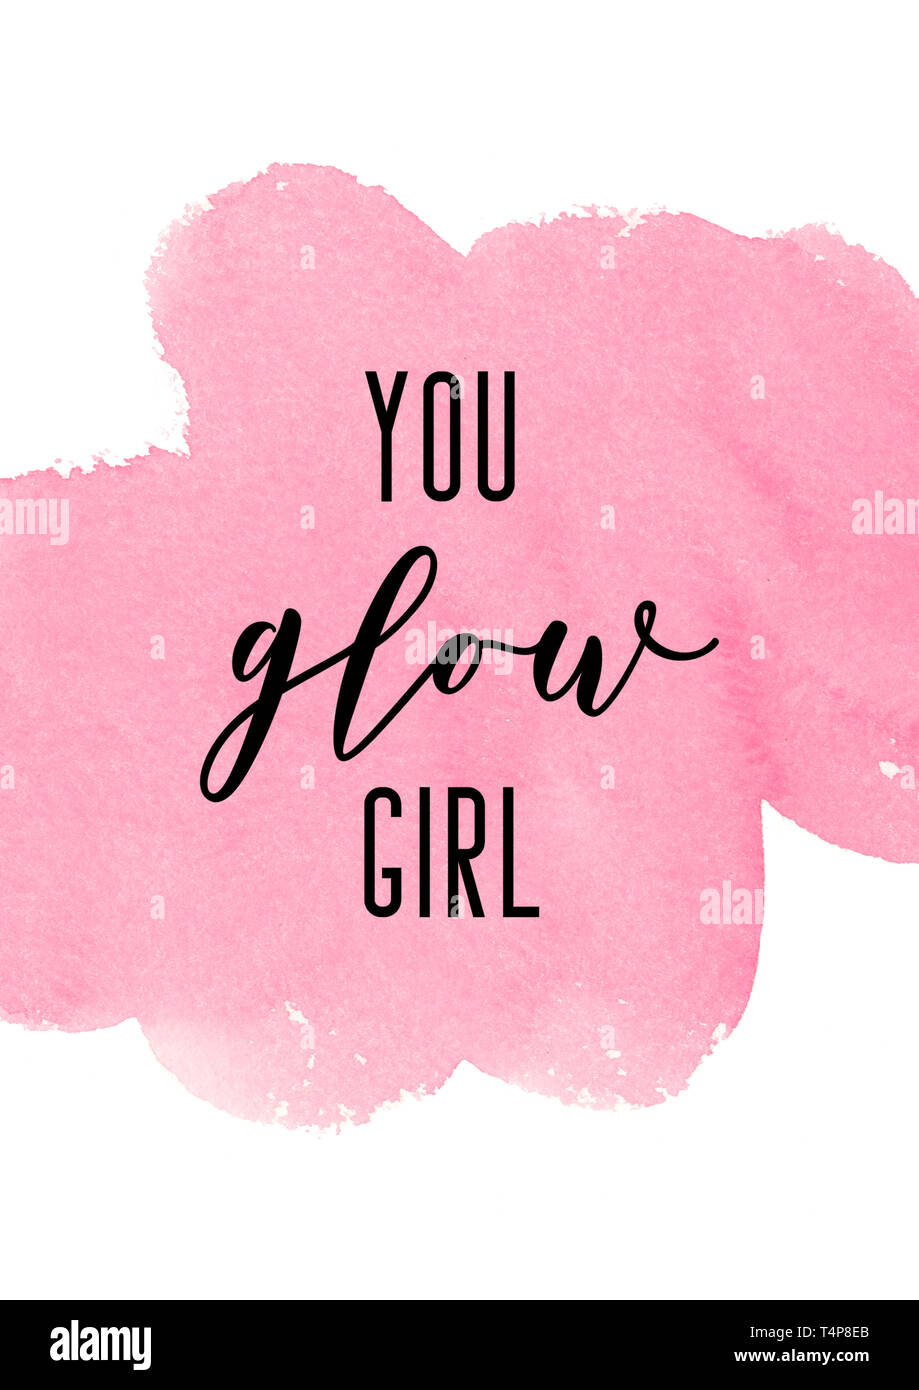 You glow girl. Girly quote with pink watercolor background Stock Photo -  Alamy